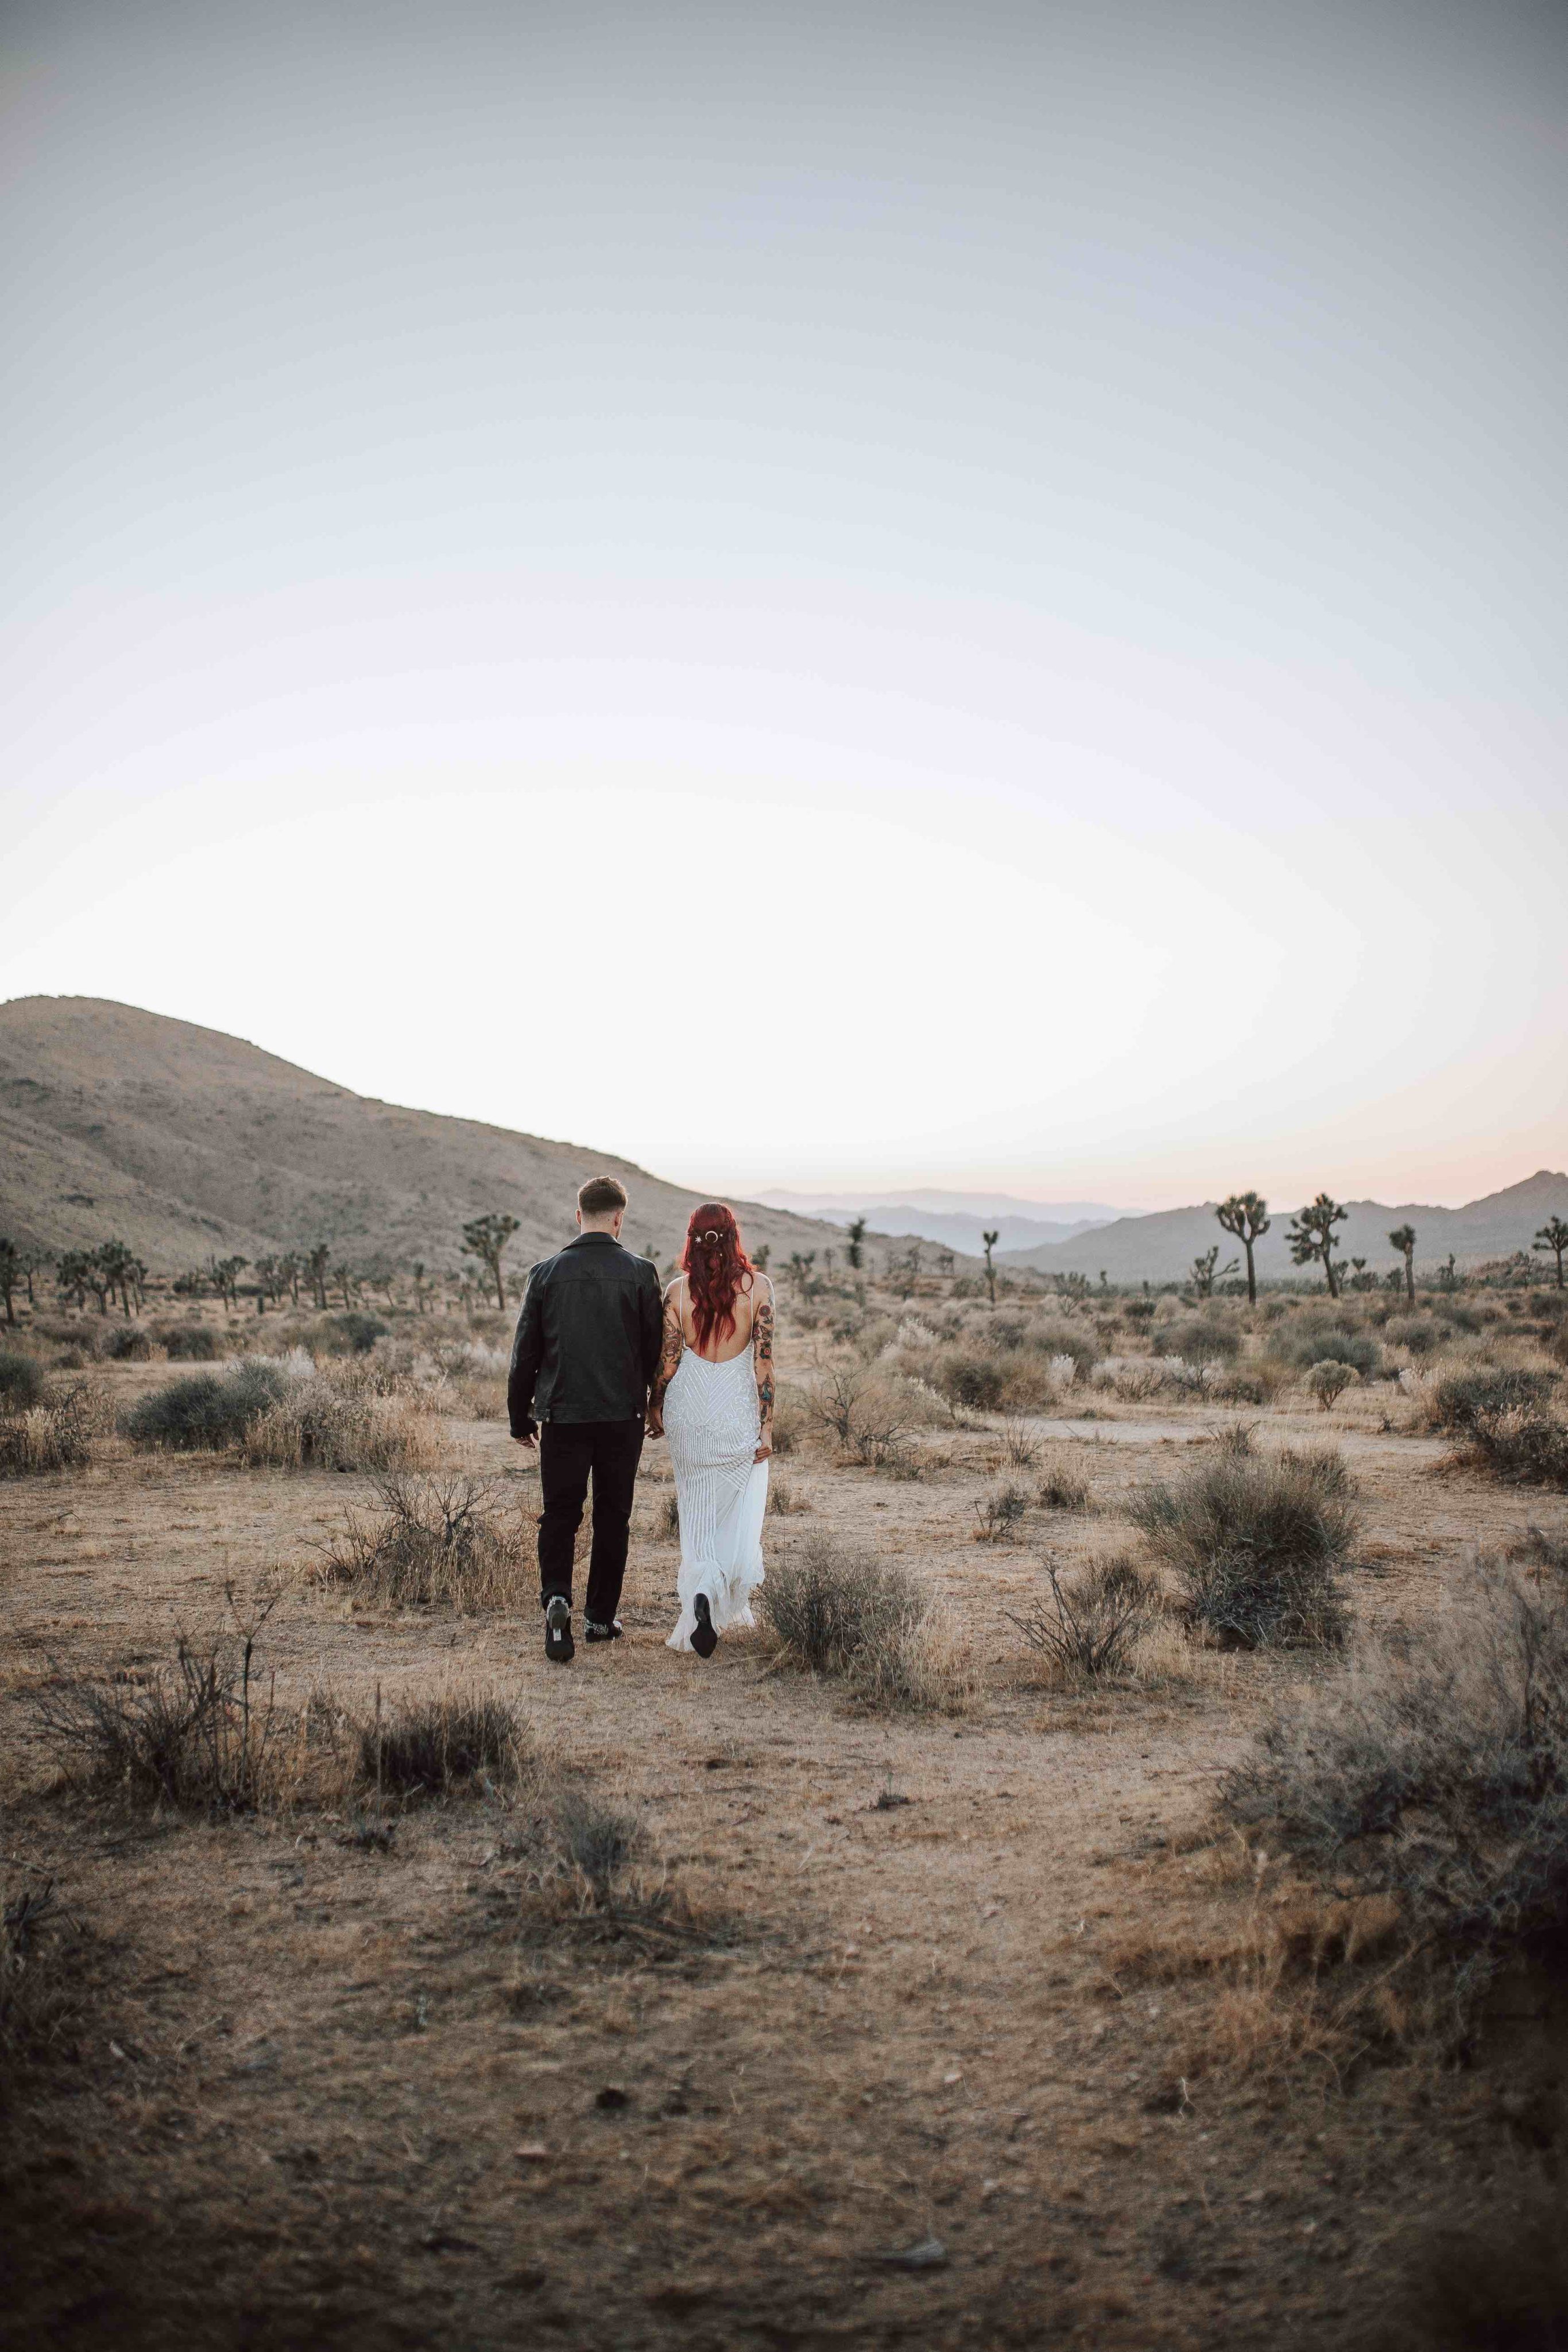 Bride and groom holding hands in the desert